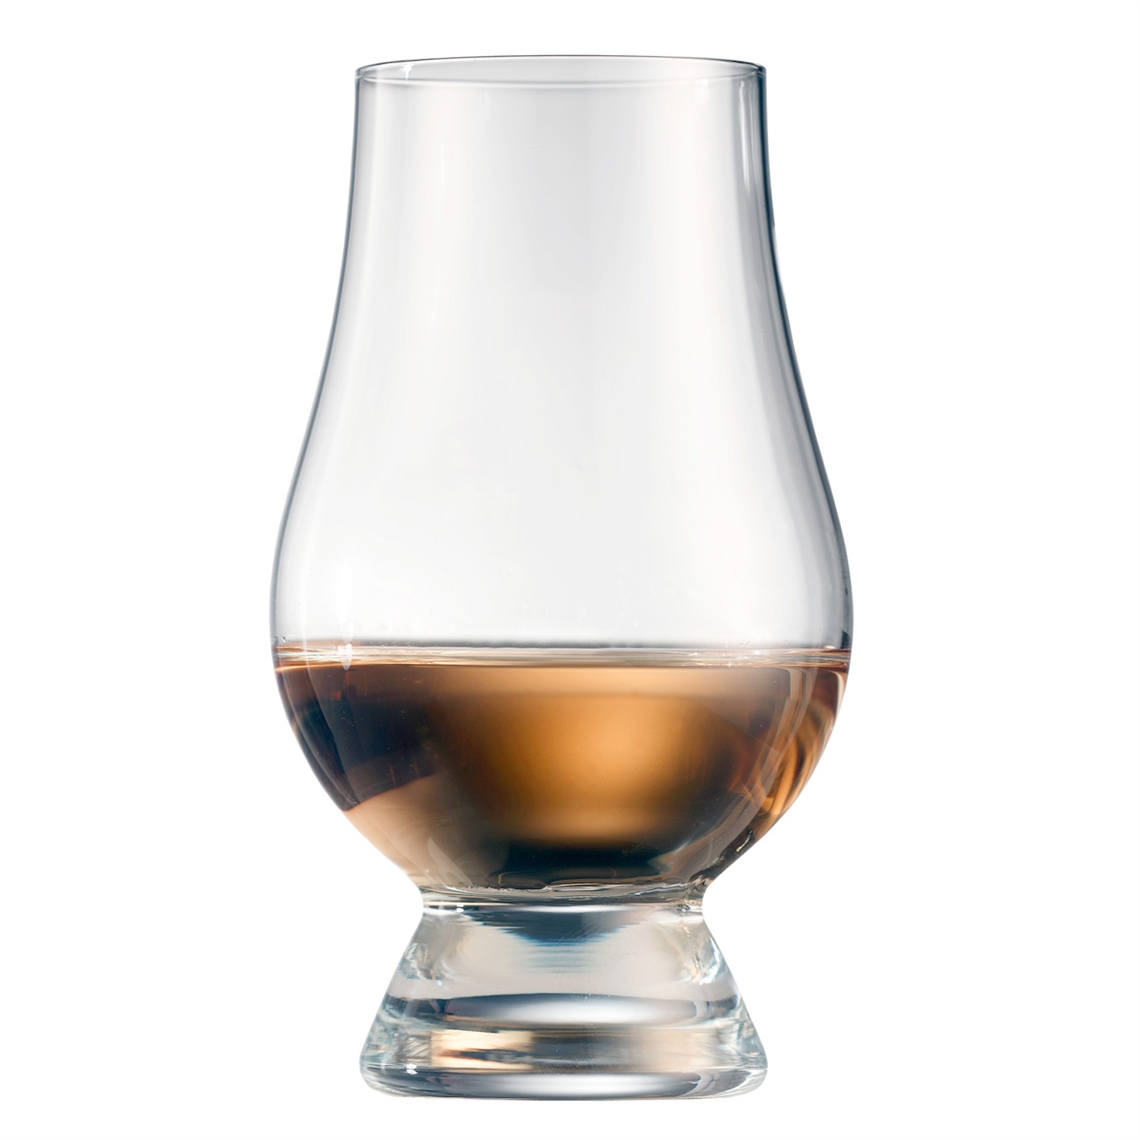 View more what makes iso wine tasting glasses so popular? from our Whisky Glasses range